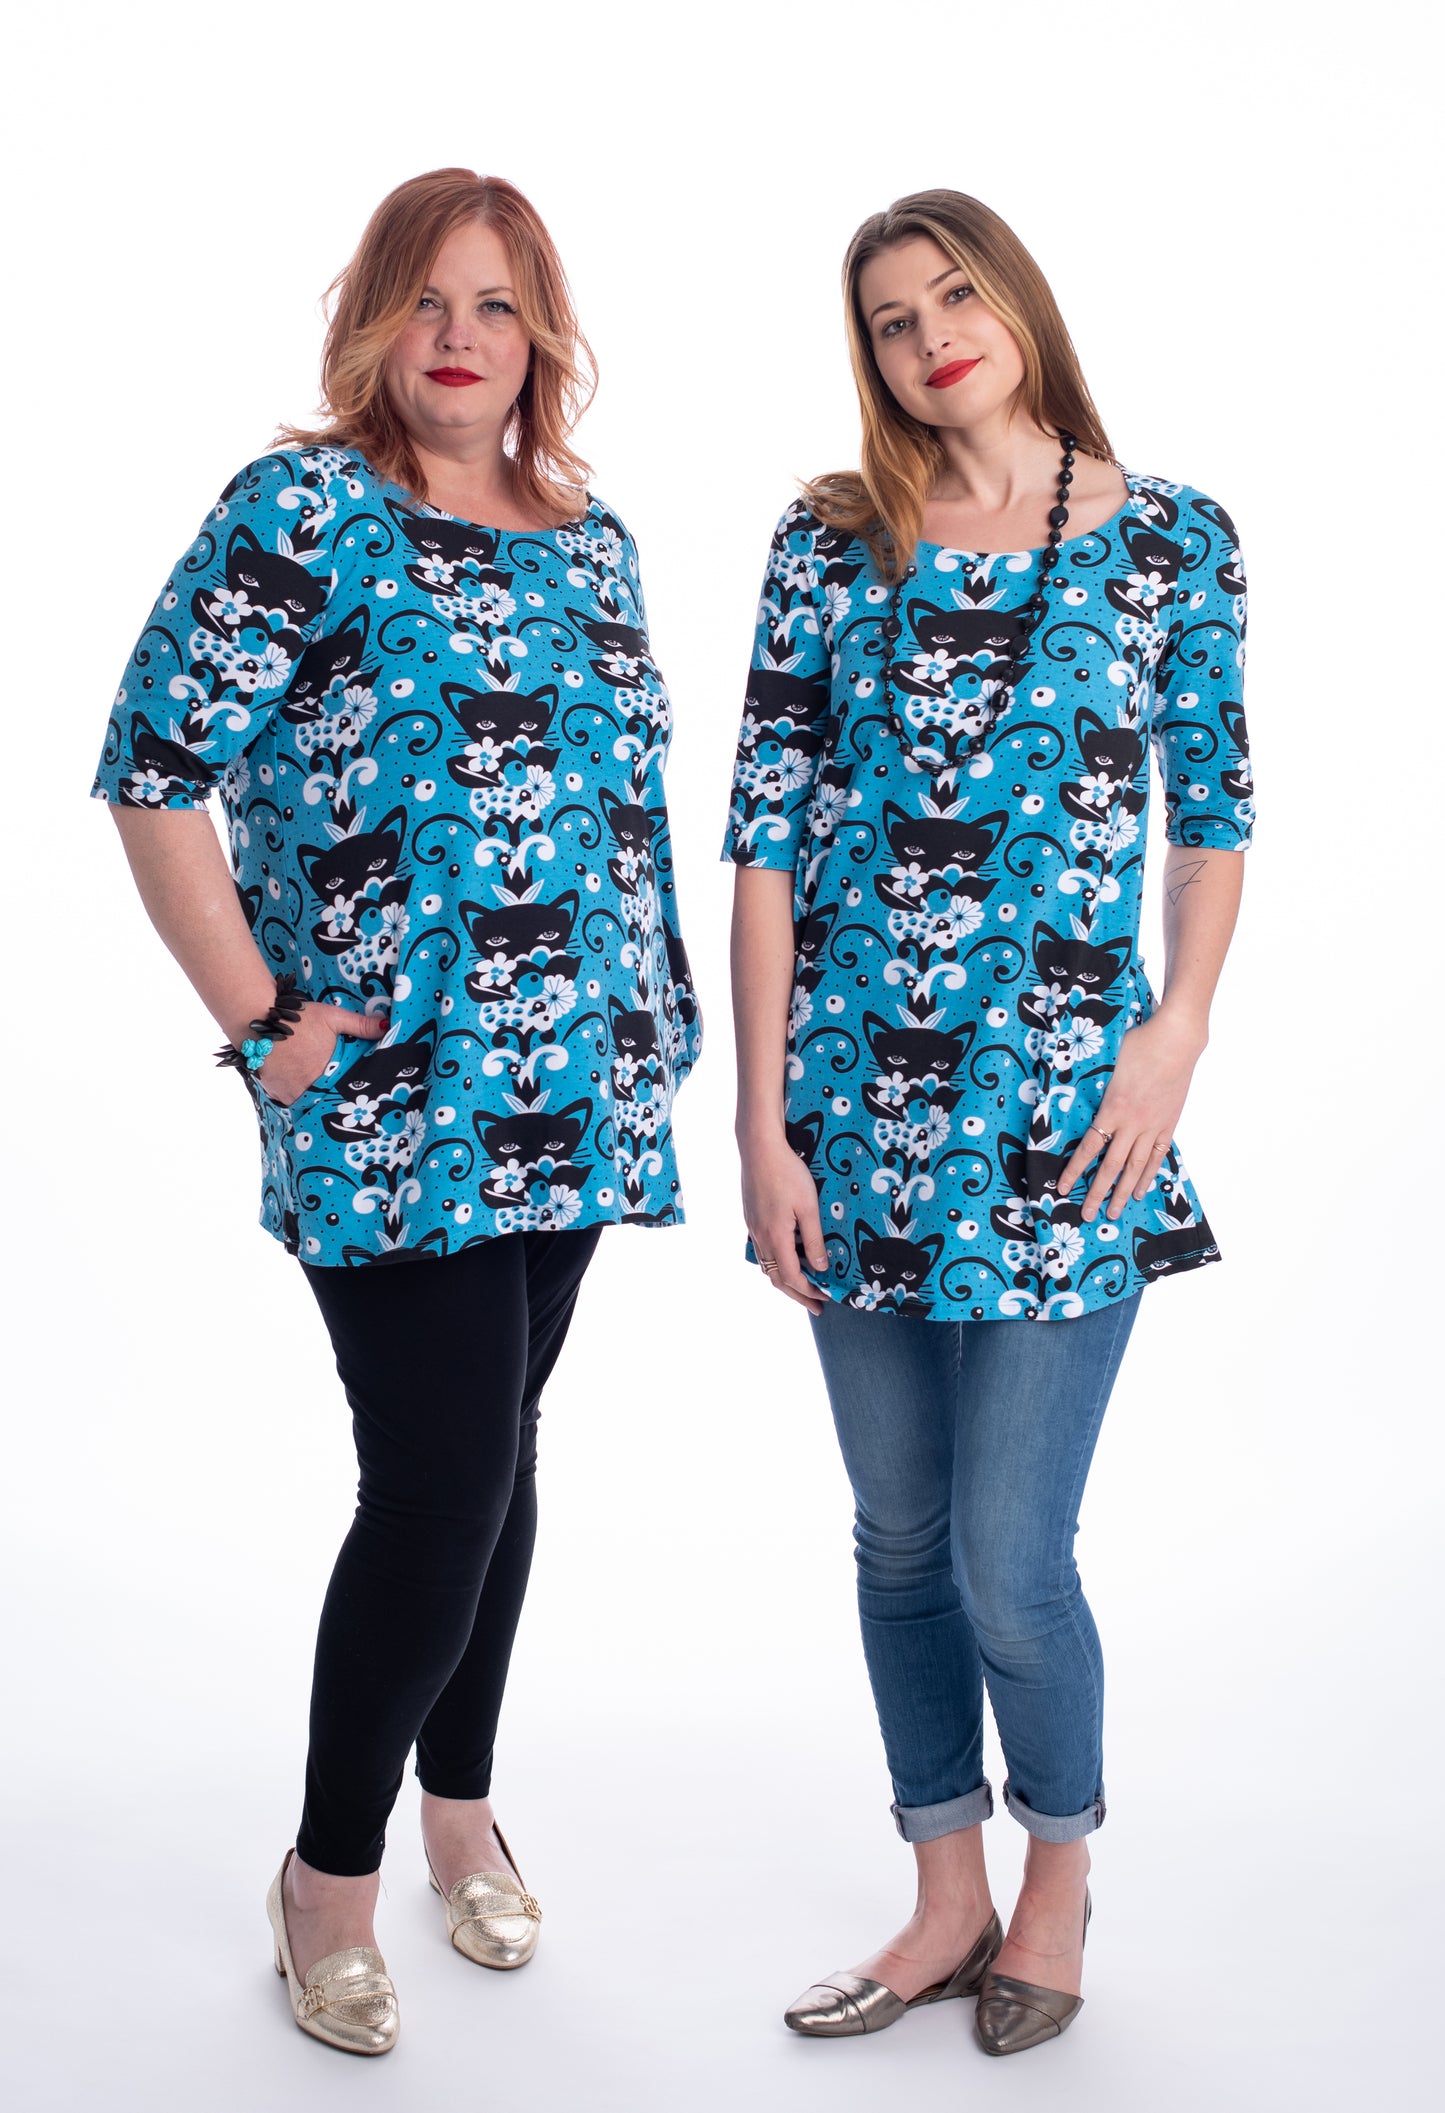 Aqua blue black white a-line pocket tunic with black cat and flower print on 2 models